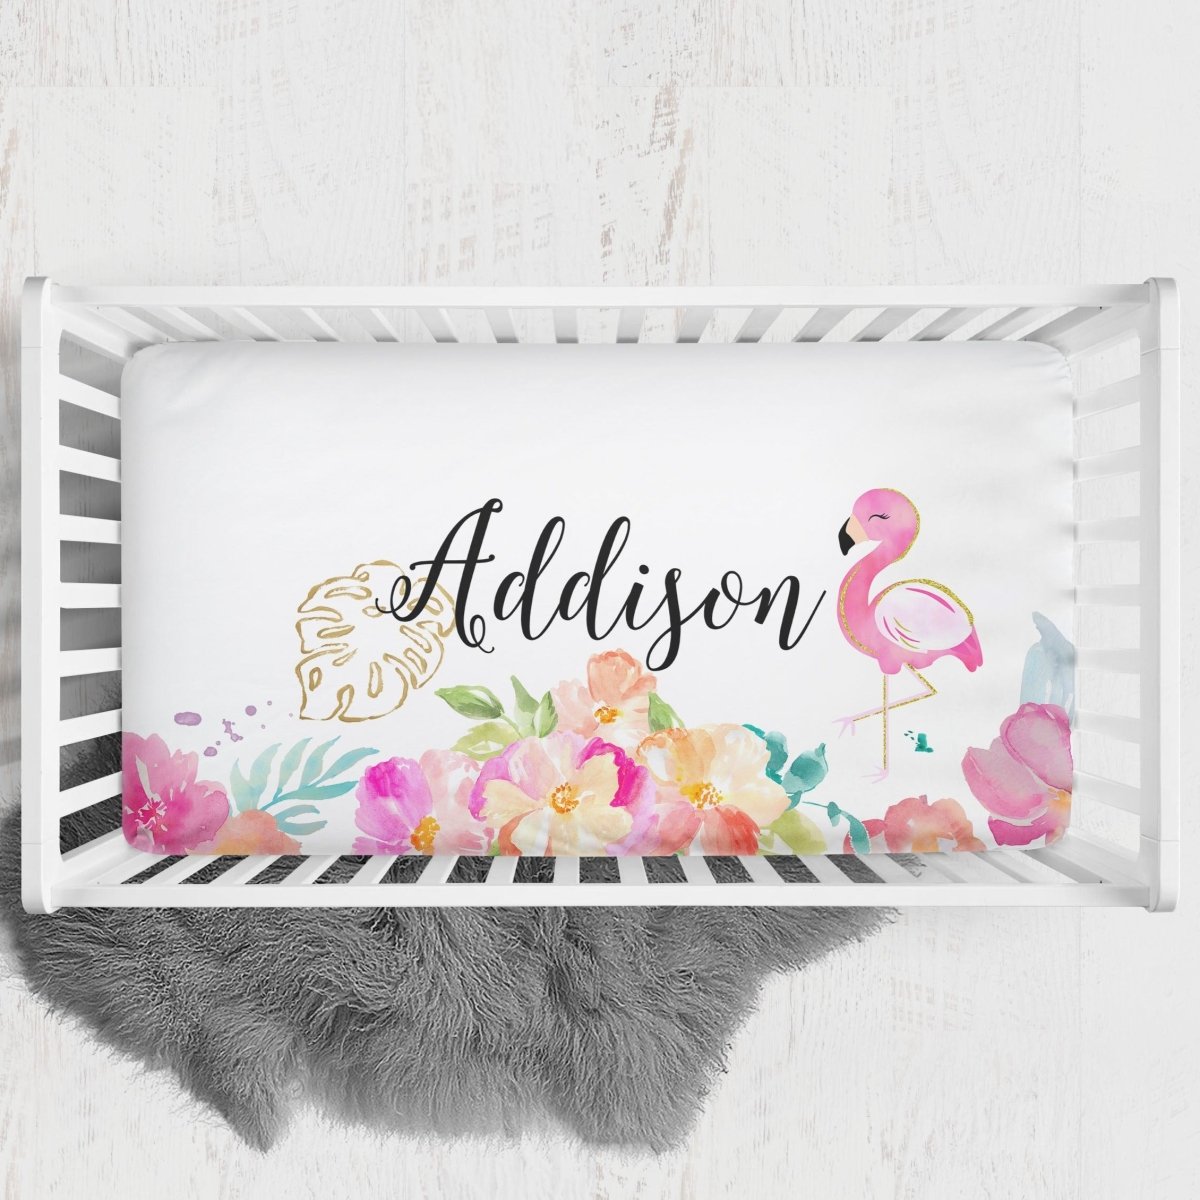 Tropical Flamingo Personalized Crib Sheet - gender_girl, Personalized_Yes, text